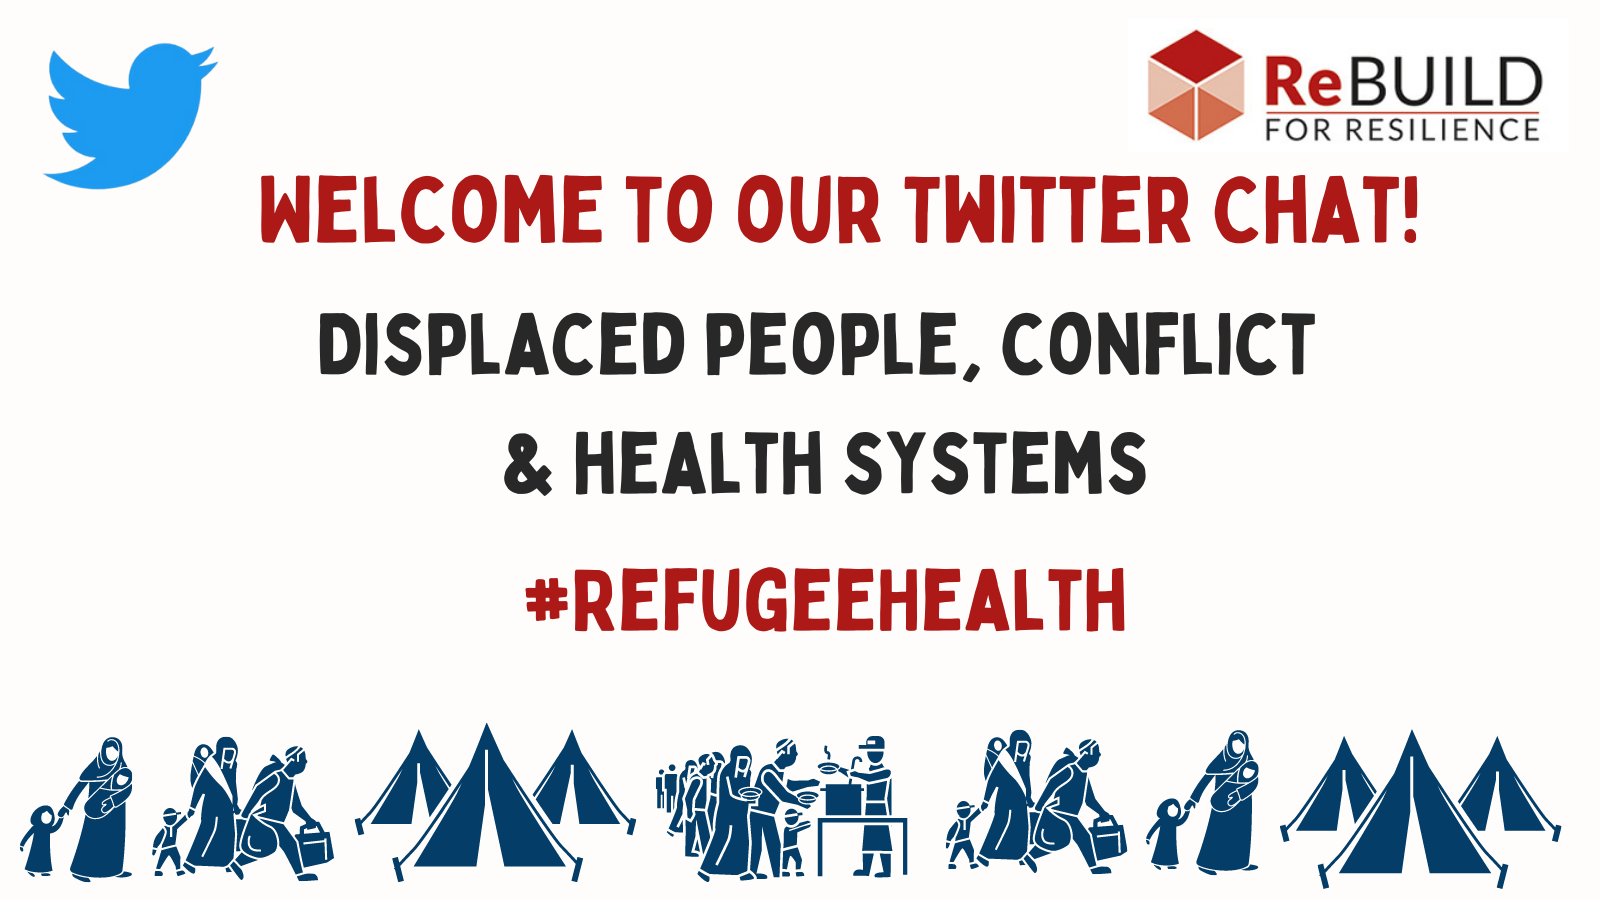 Image welcoming viewers to the twitter chat on dispalced people, conflict and health systems